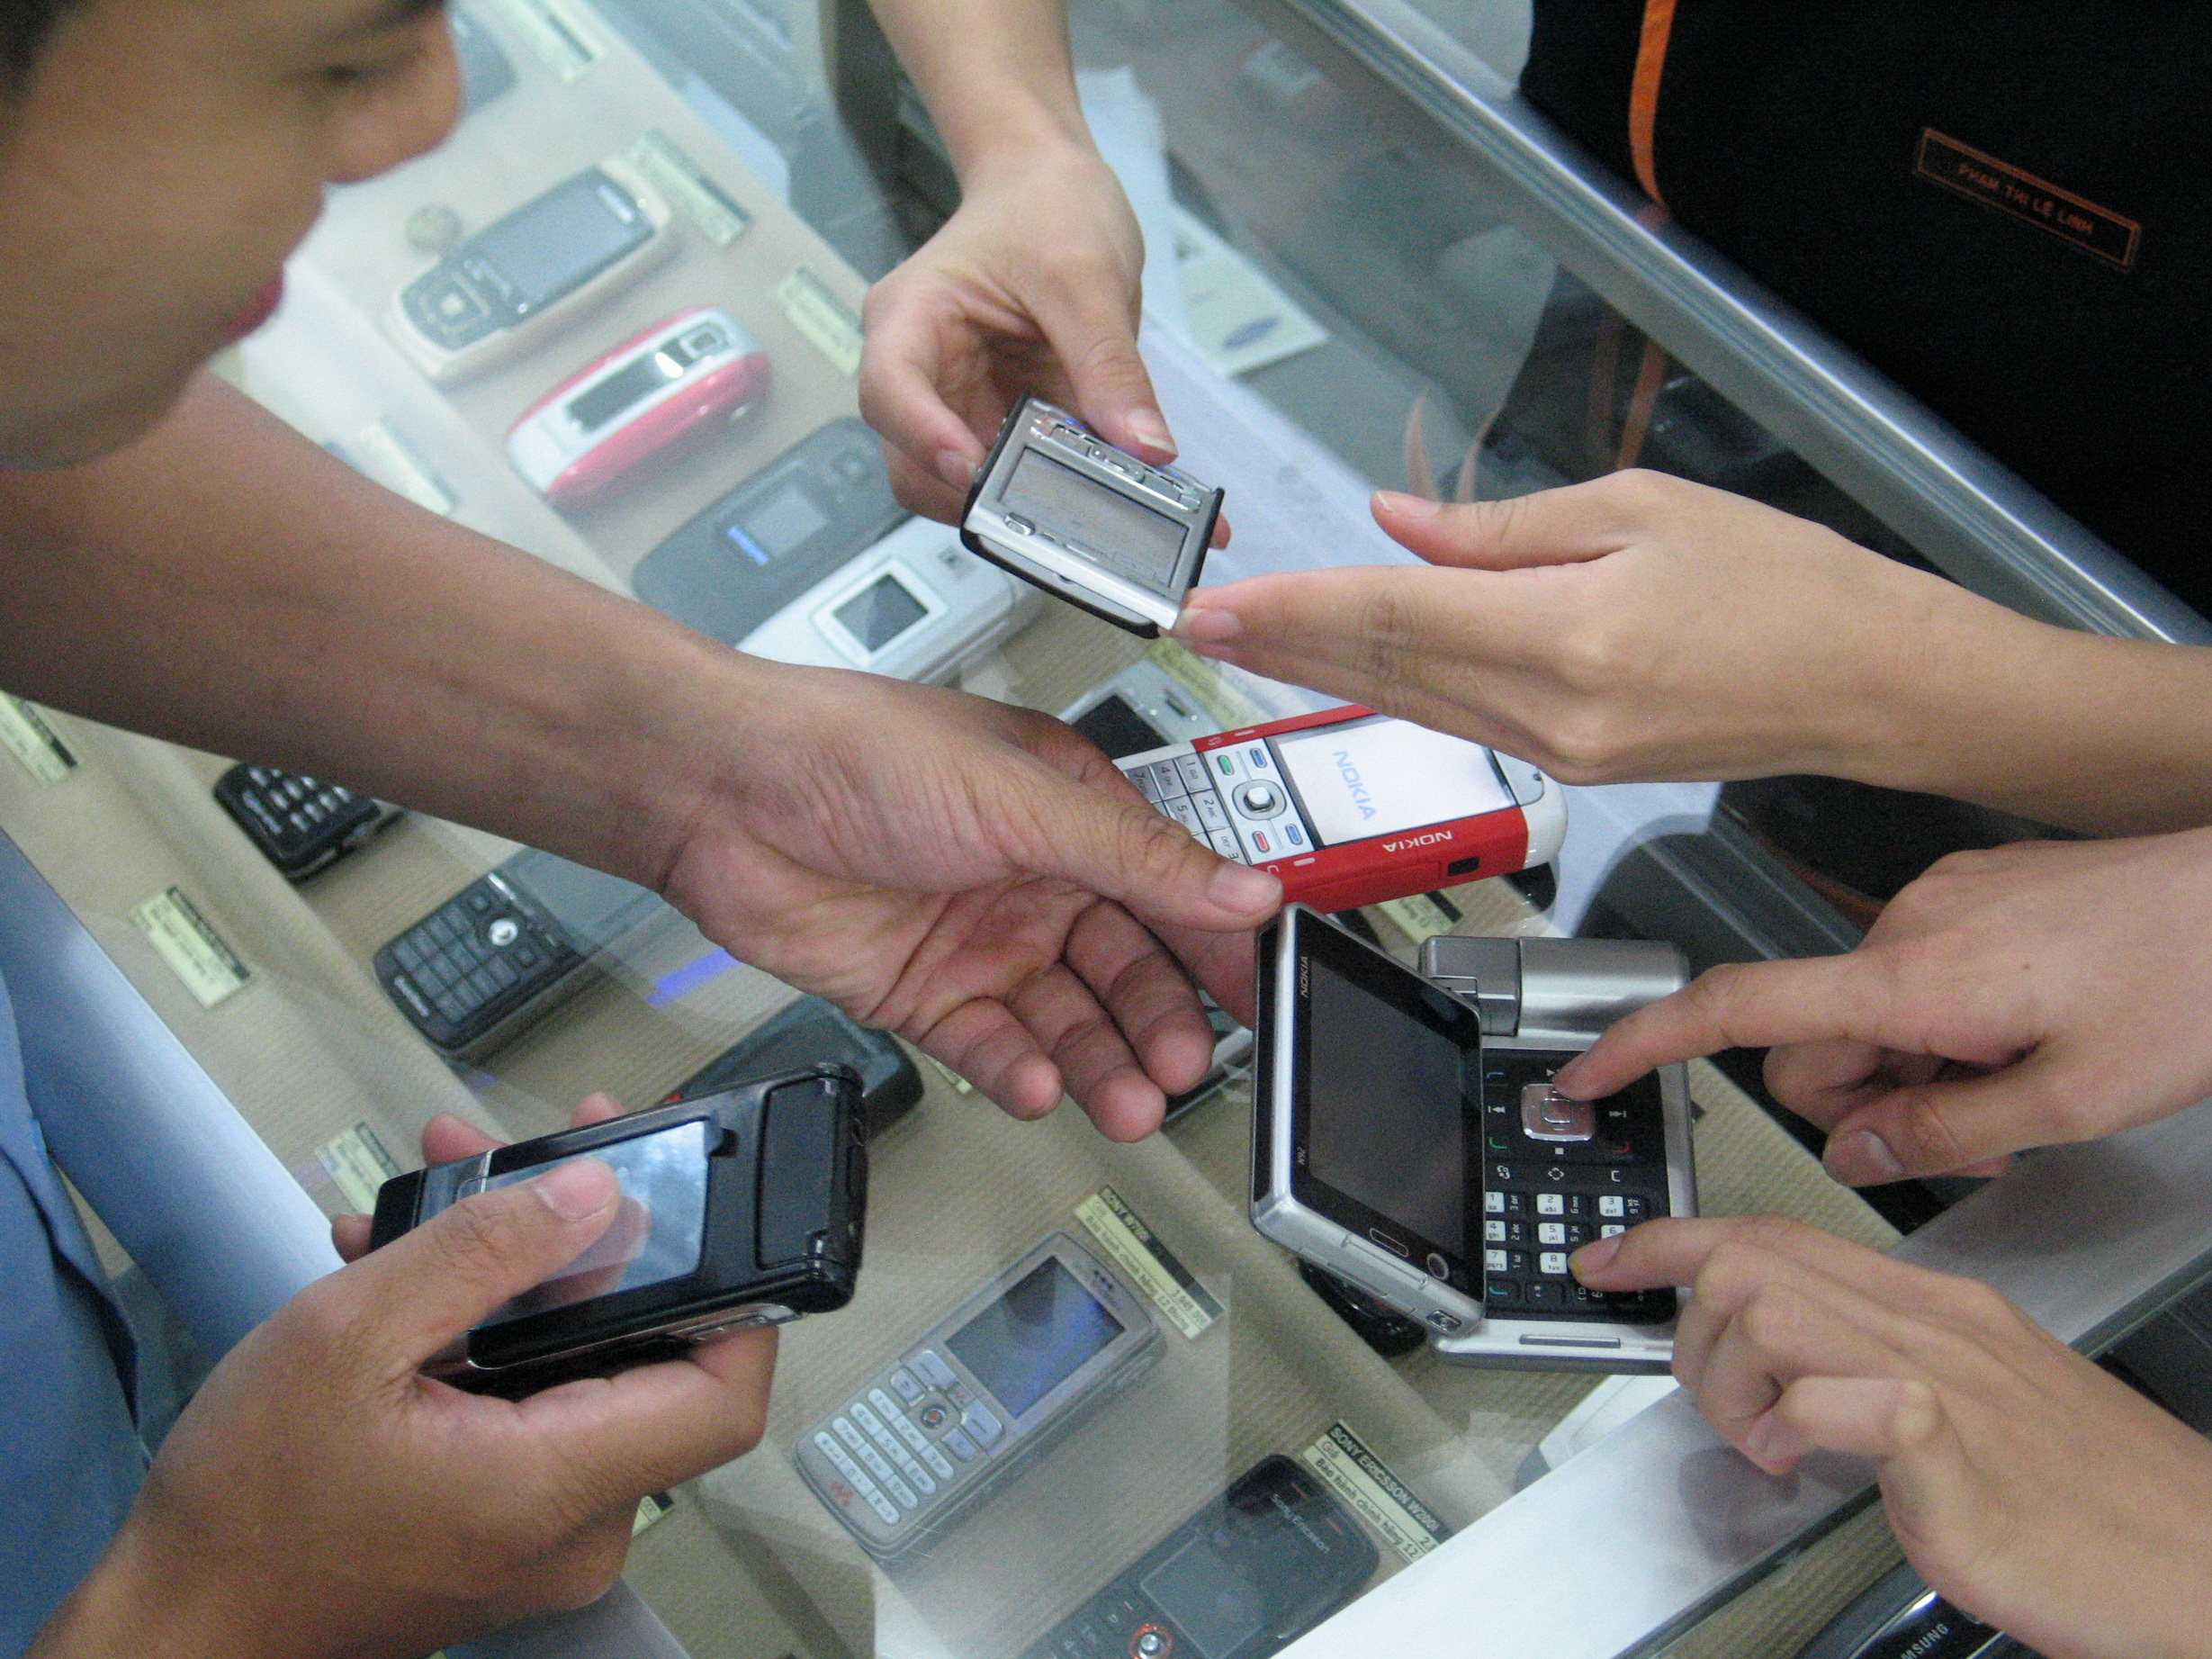 Vietnam’s listed mobile retailer issues $23.5mn in employee share bonuses